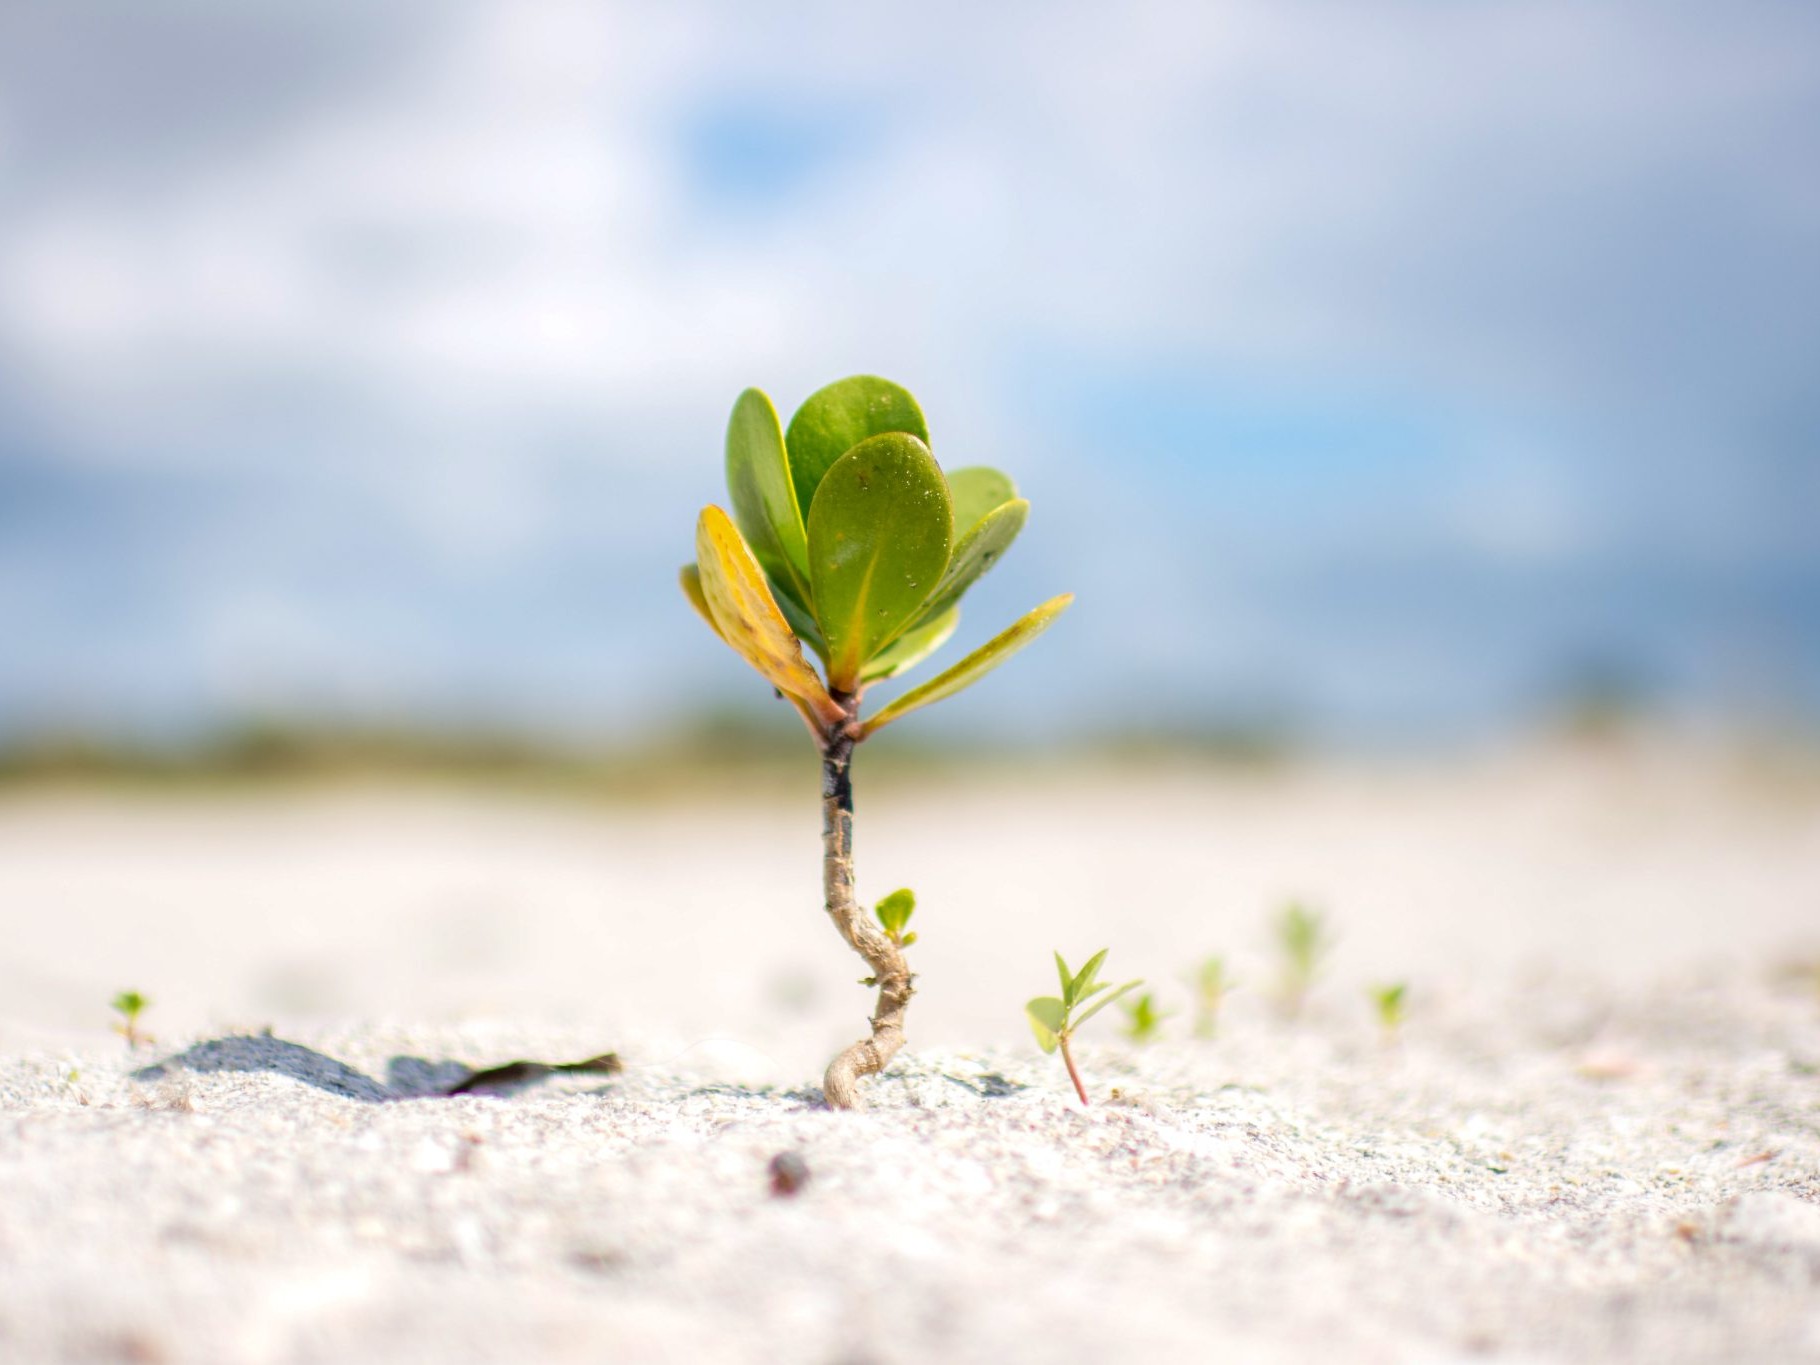 Lone sea grape plant sprouting out of a sandy beach